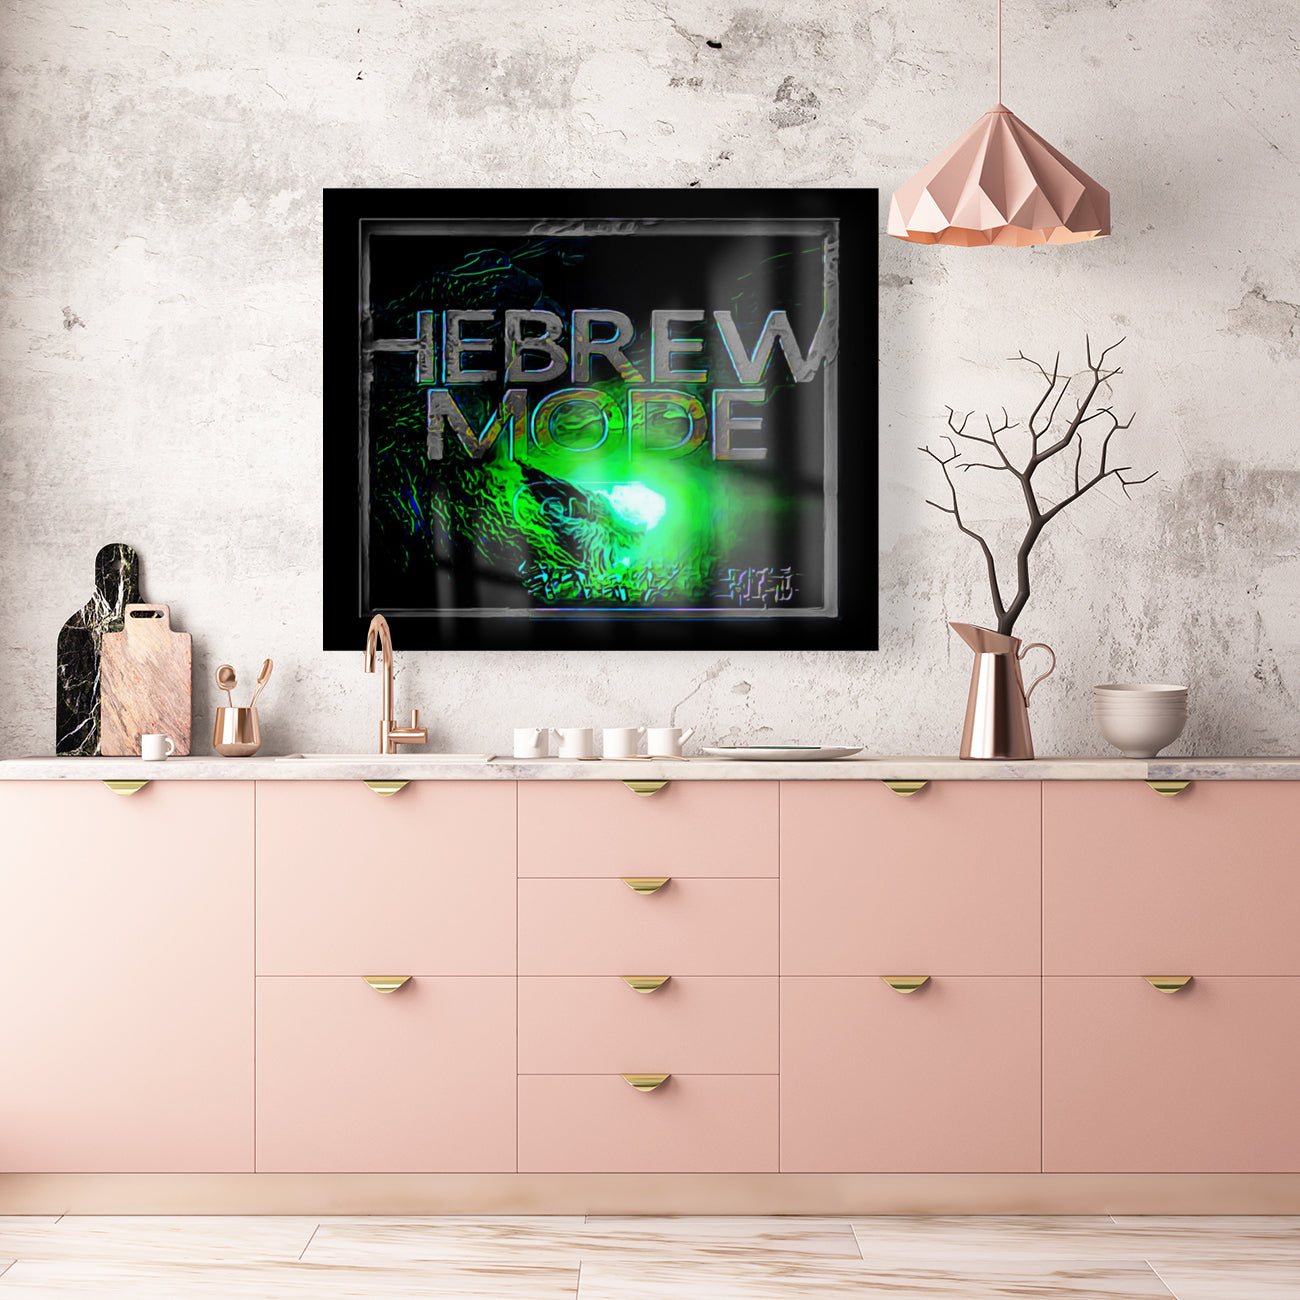 Hebrew Mode - On 01-07 Wall Art Selections